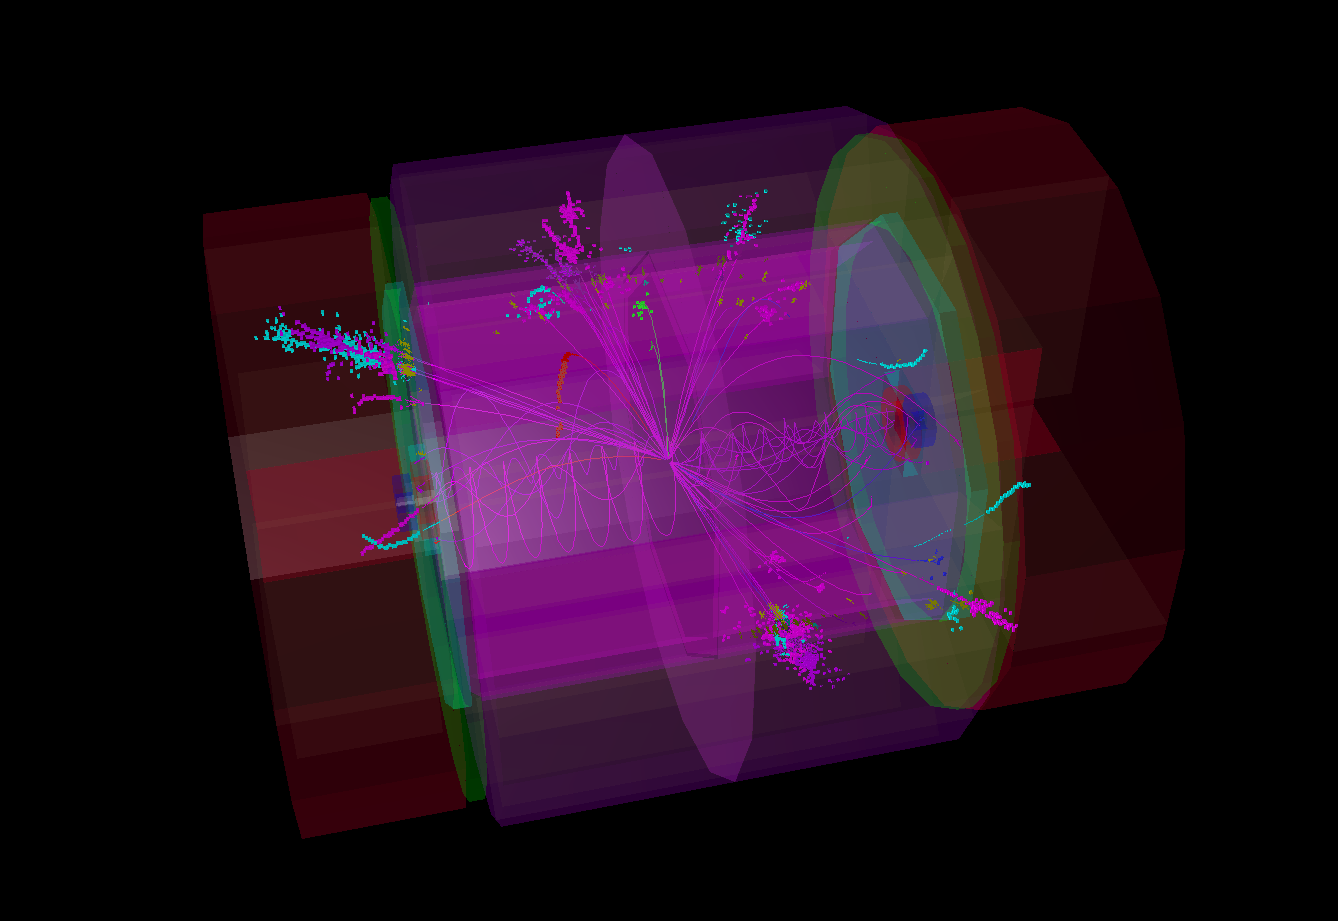 Linear Collider - Particle Flow reconstruction of a simulated event at CLIC